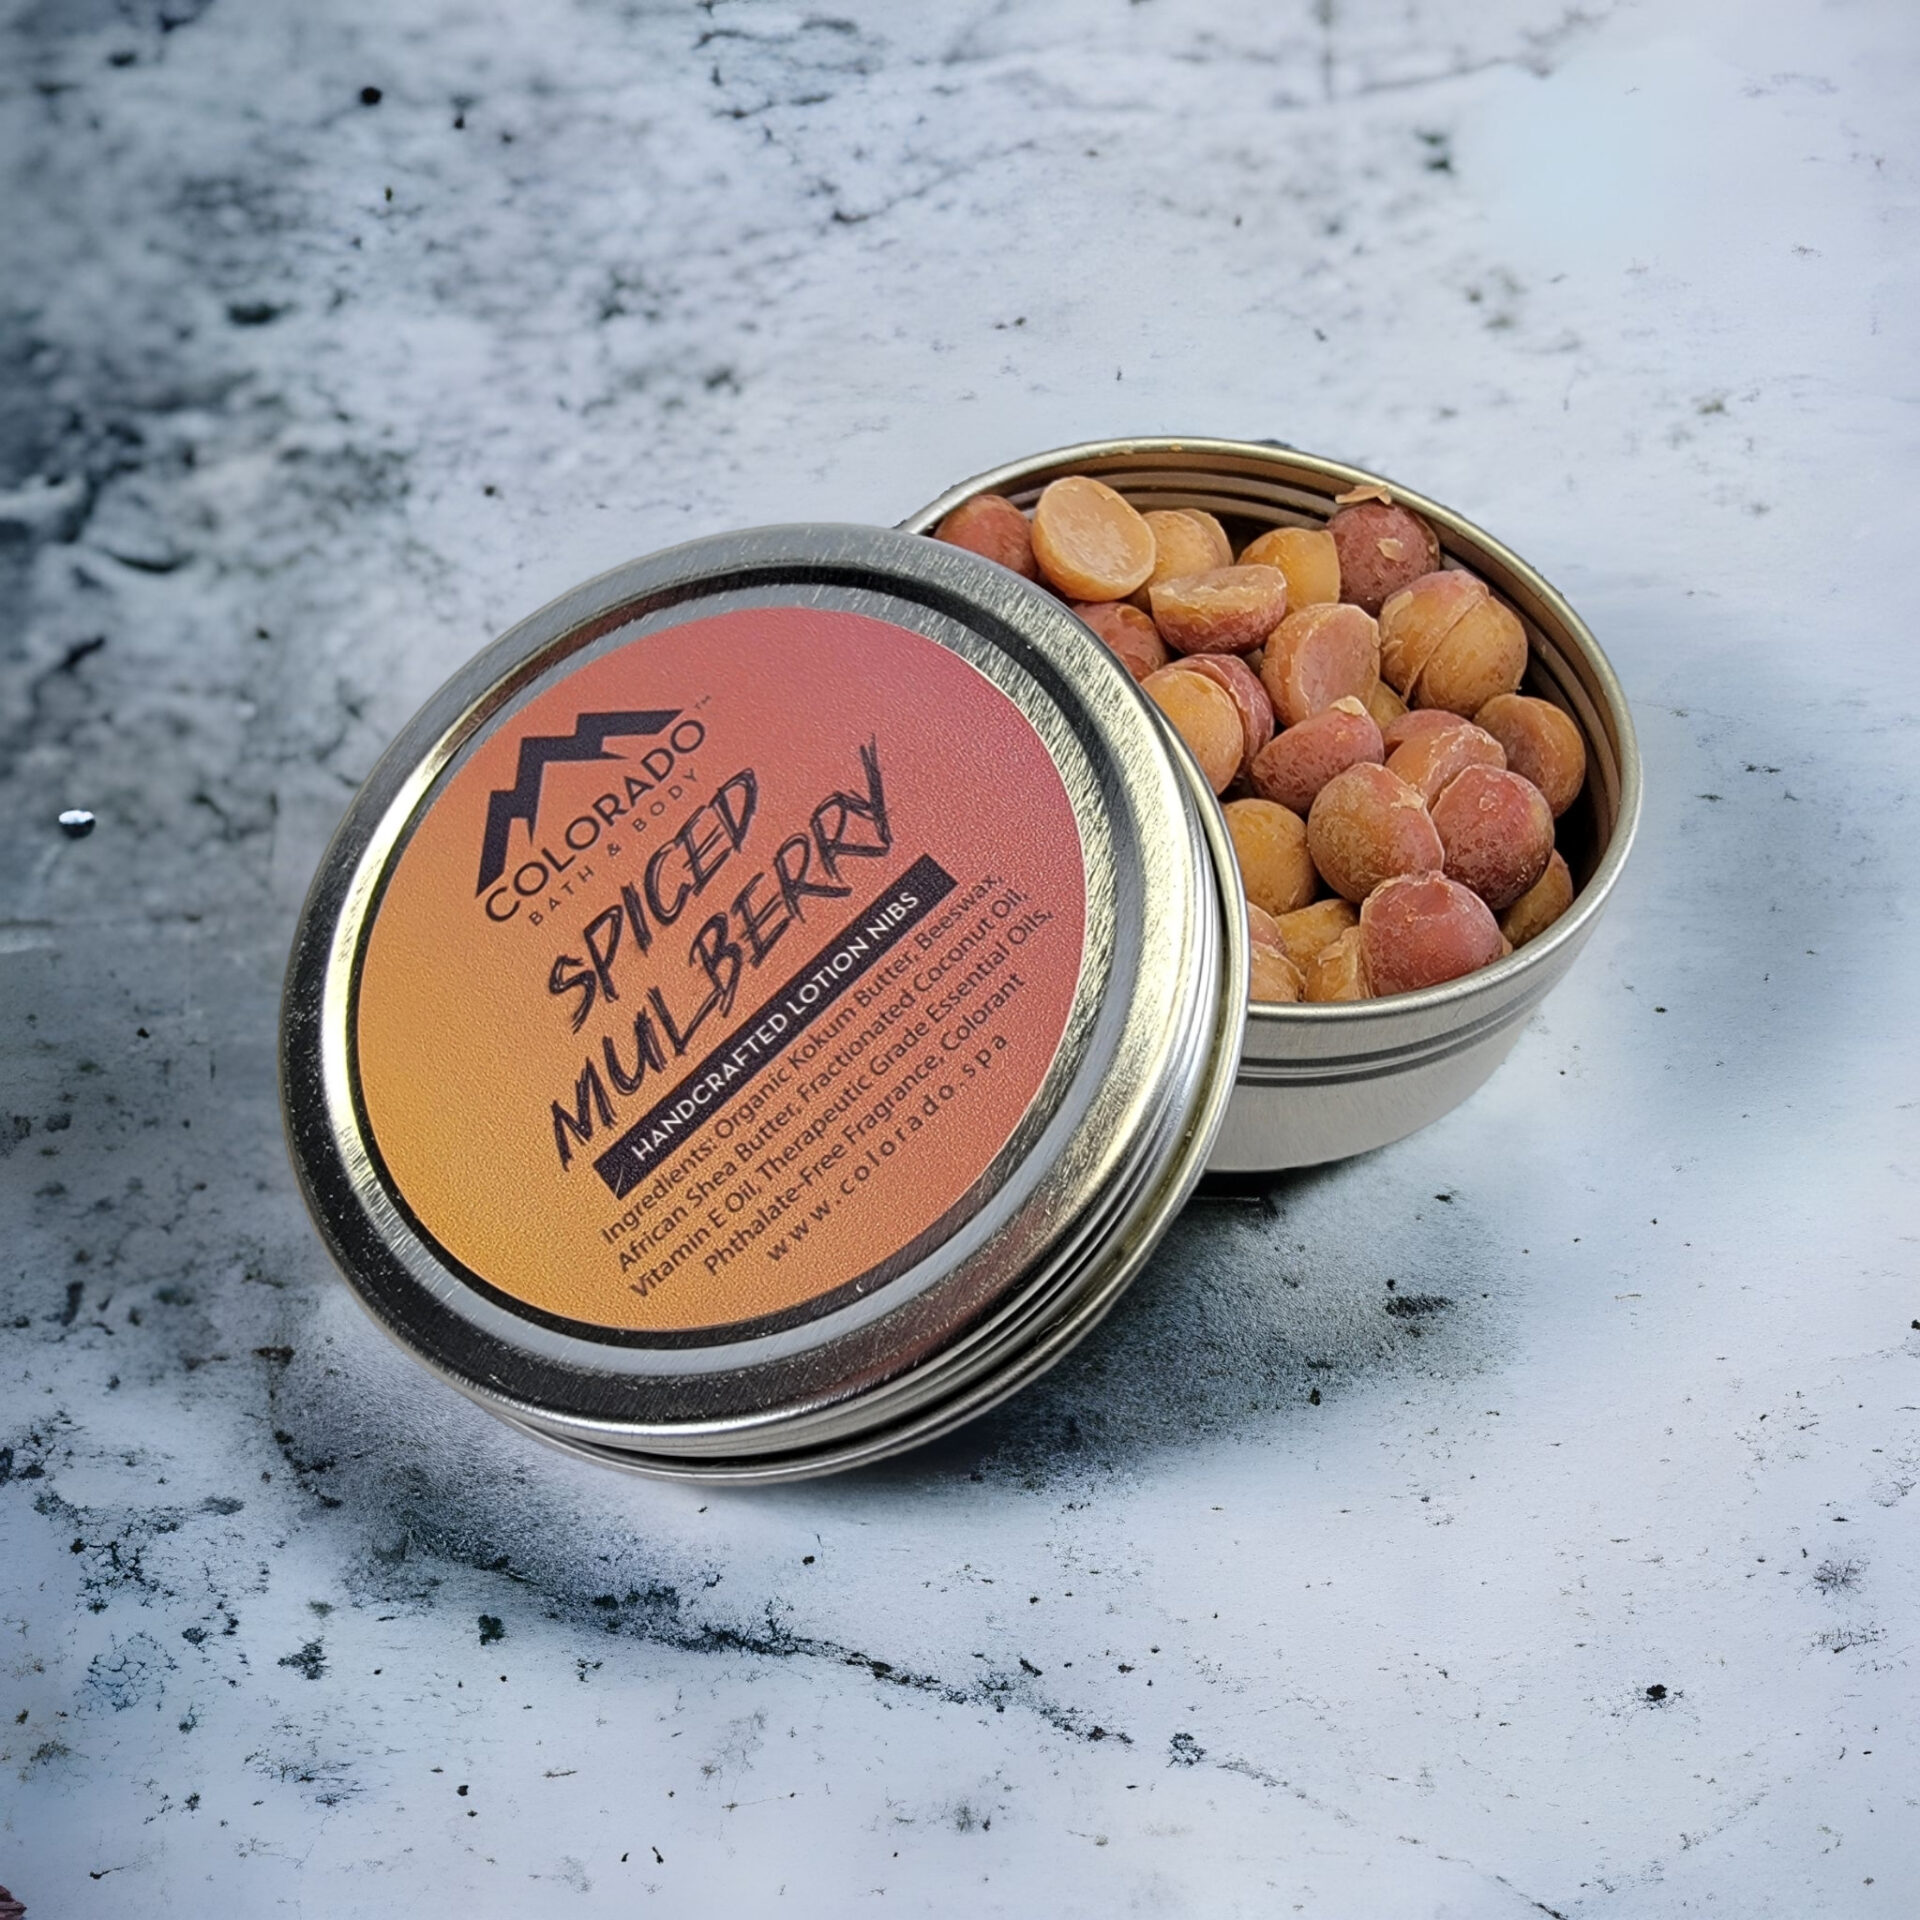 Spiced Mulberry Lotion Nibs Inside Jar